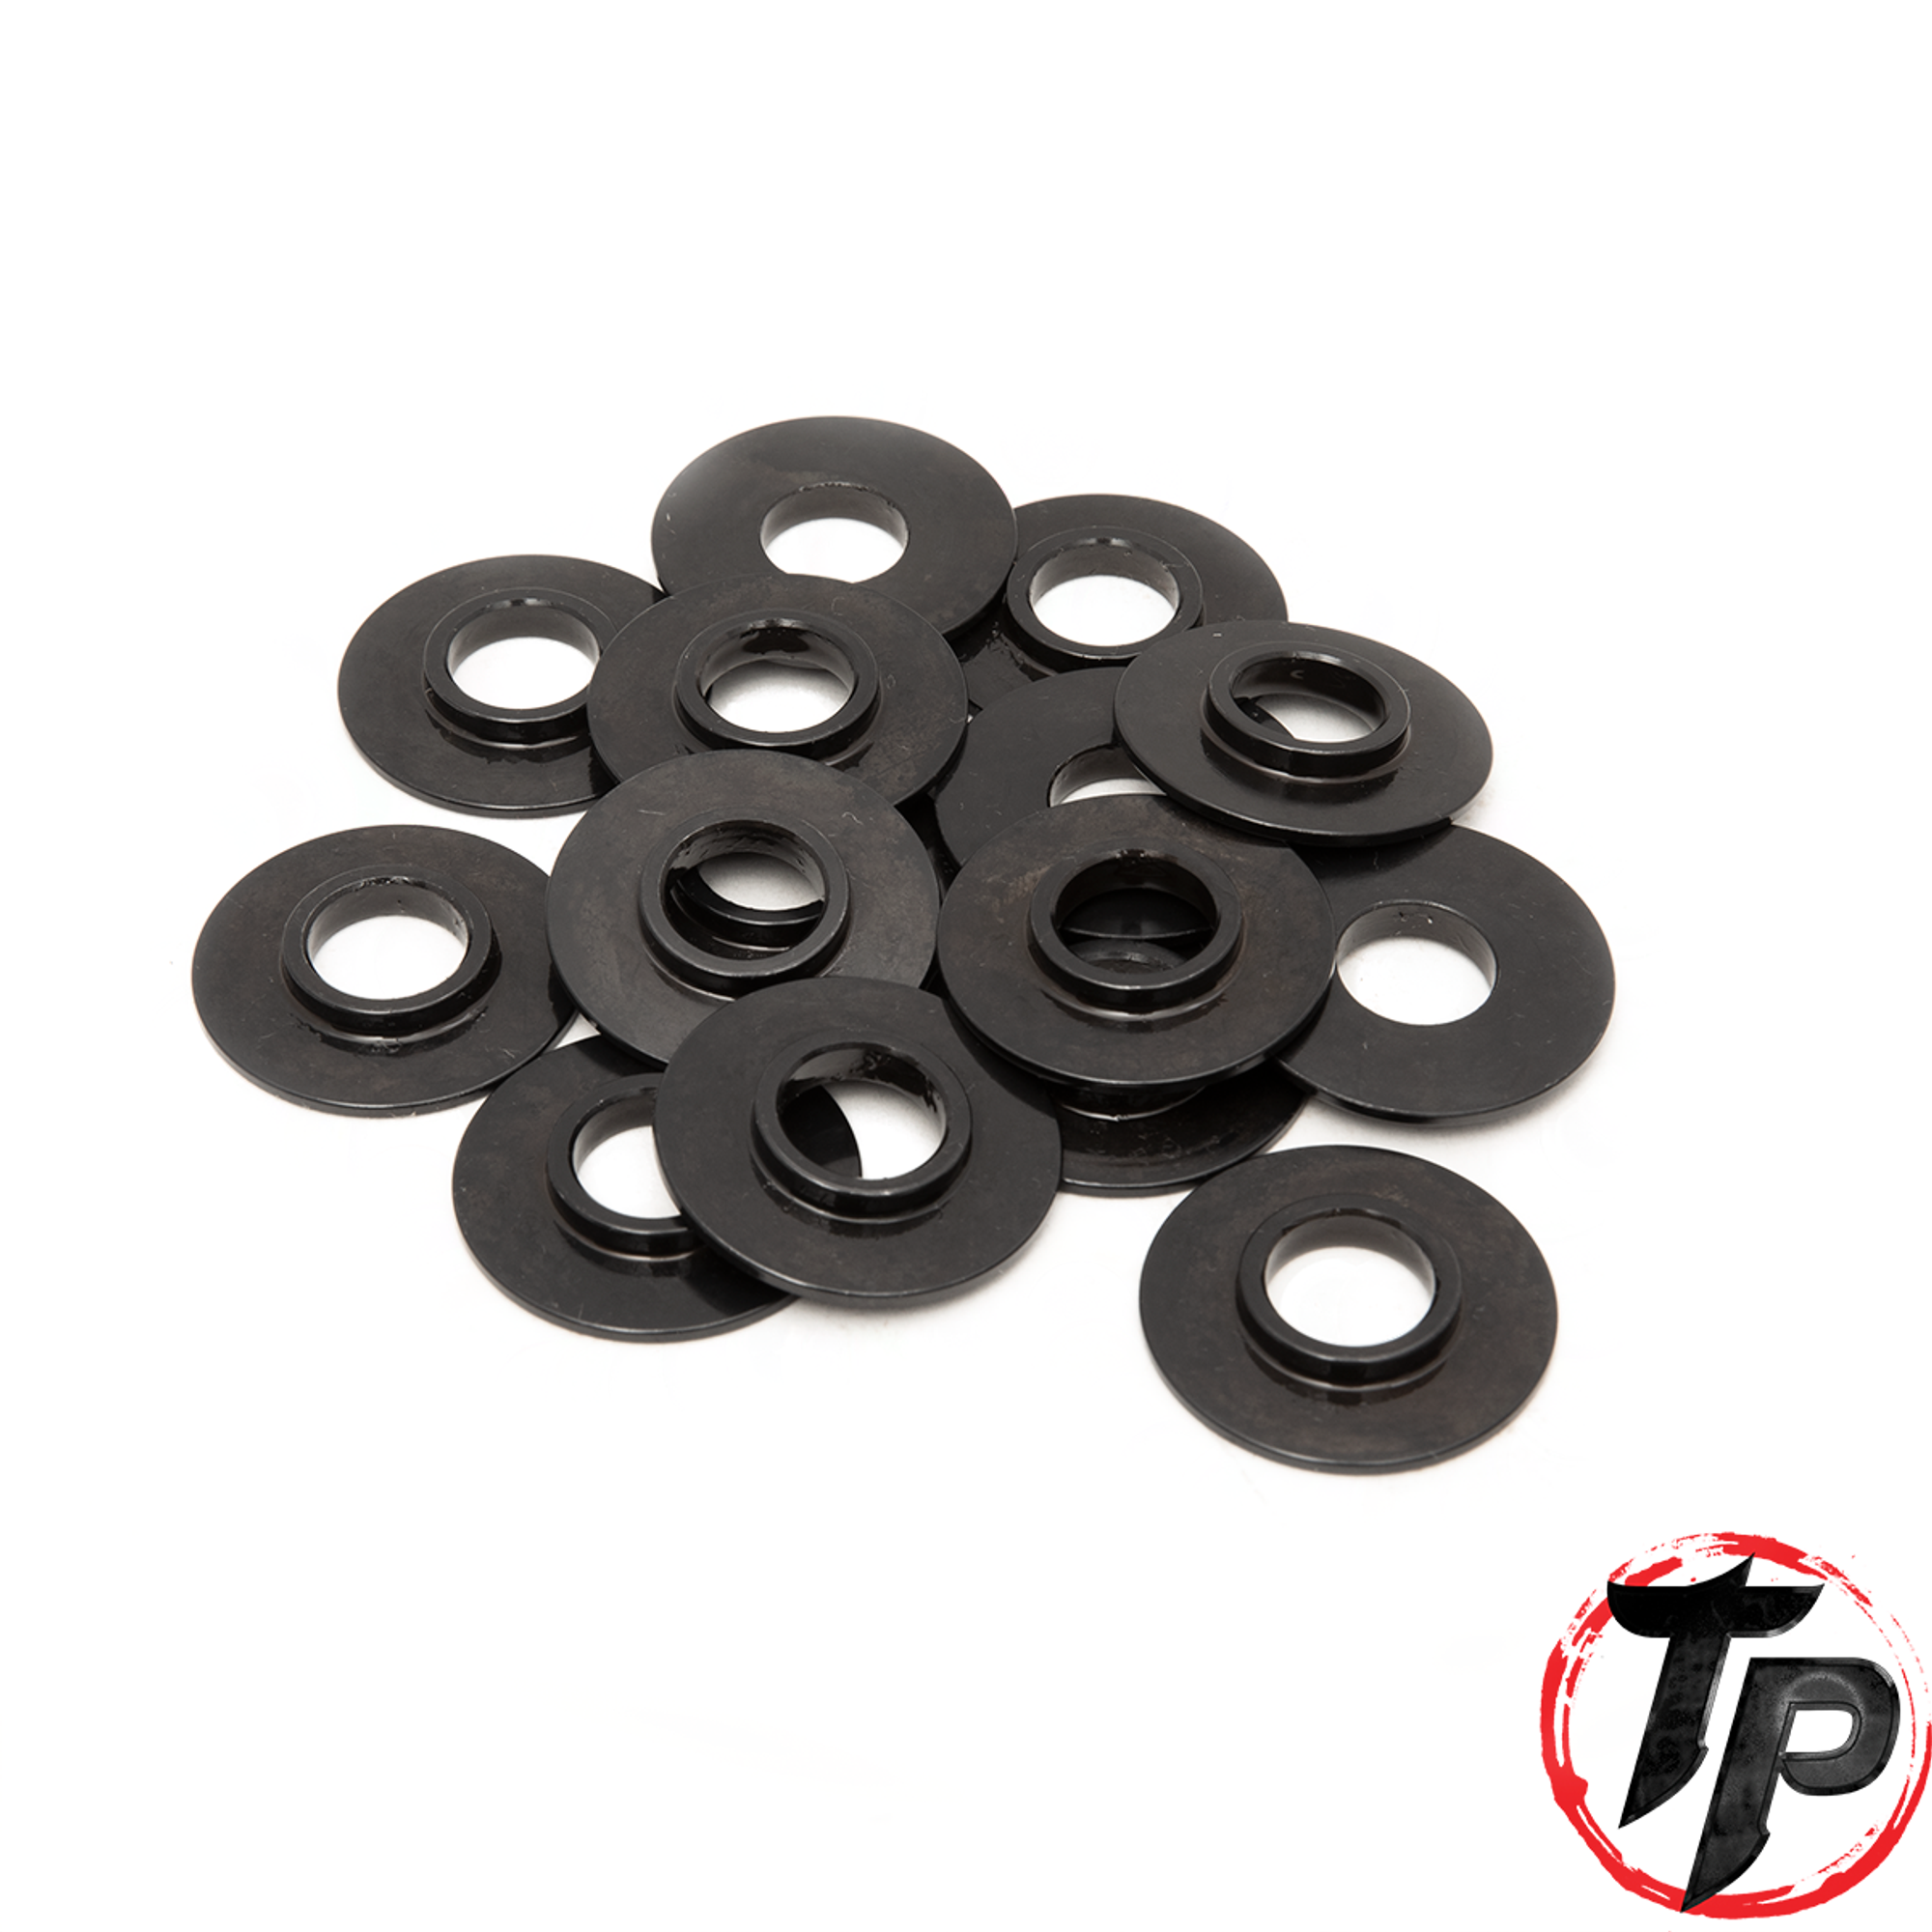 Tick Perf Spring Locators for OEM LS Guides .060" THICK